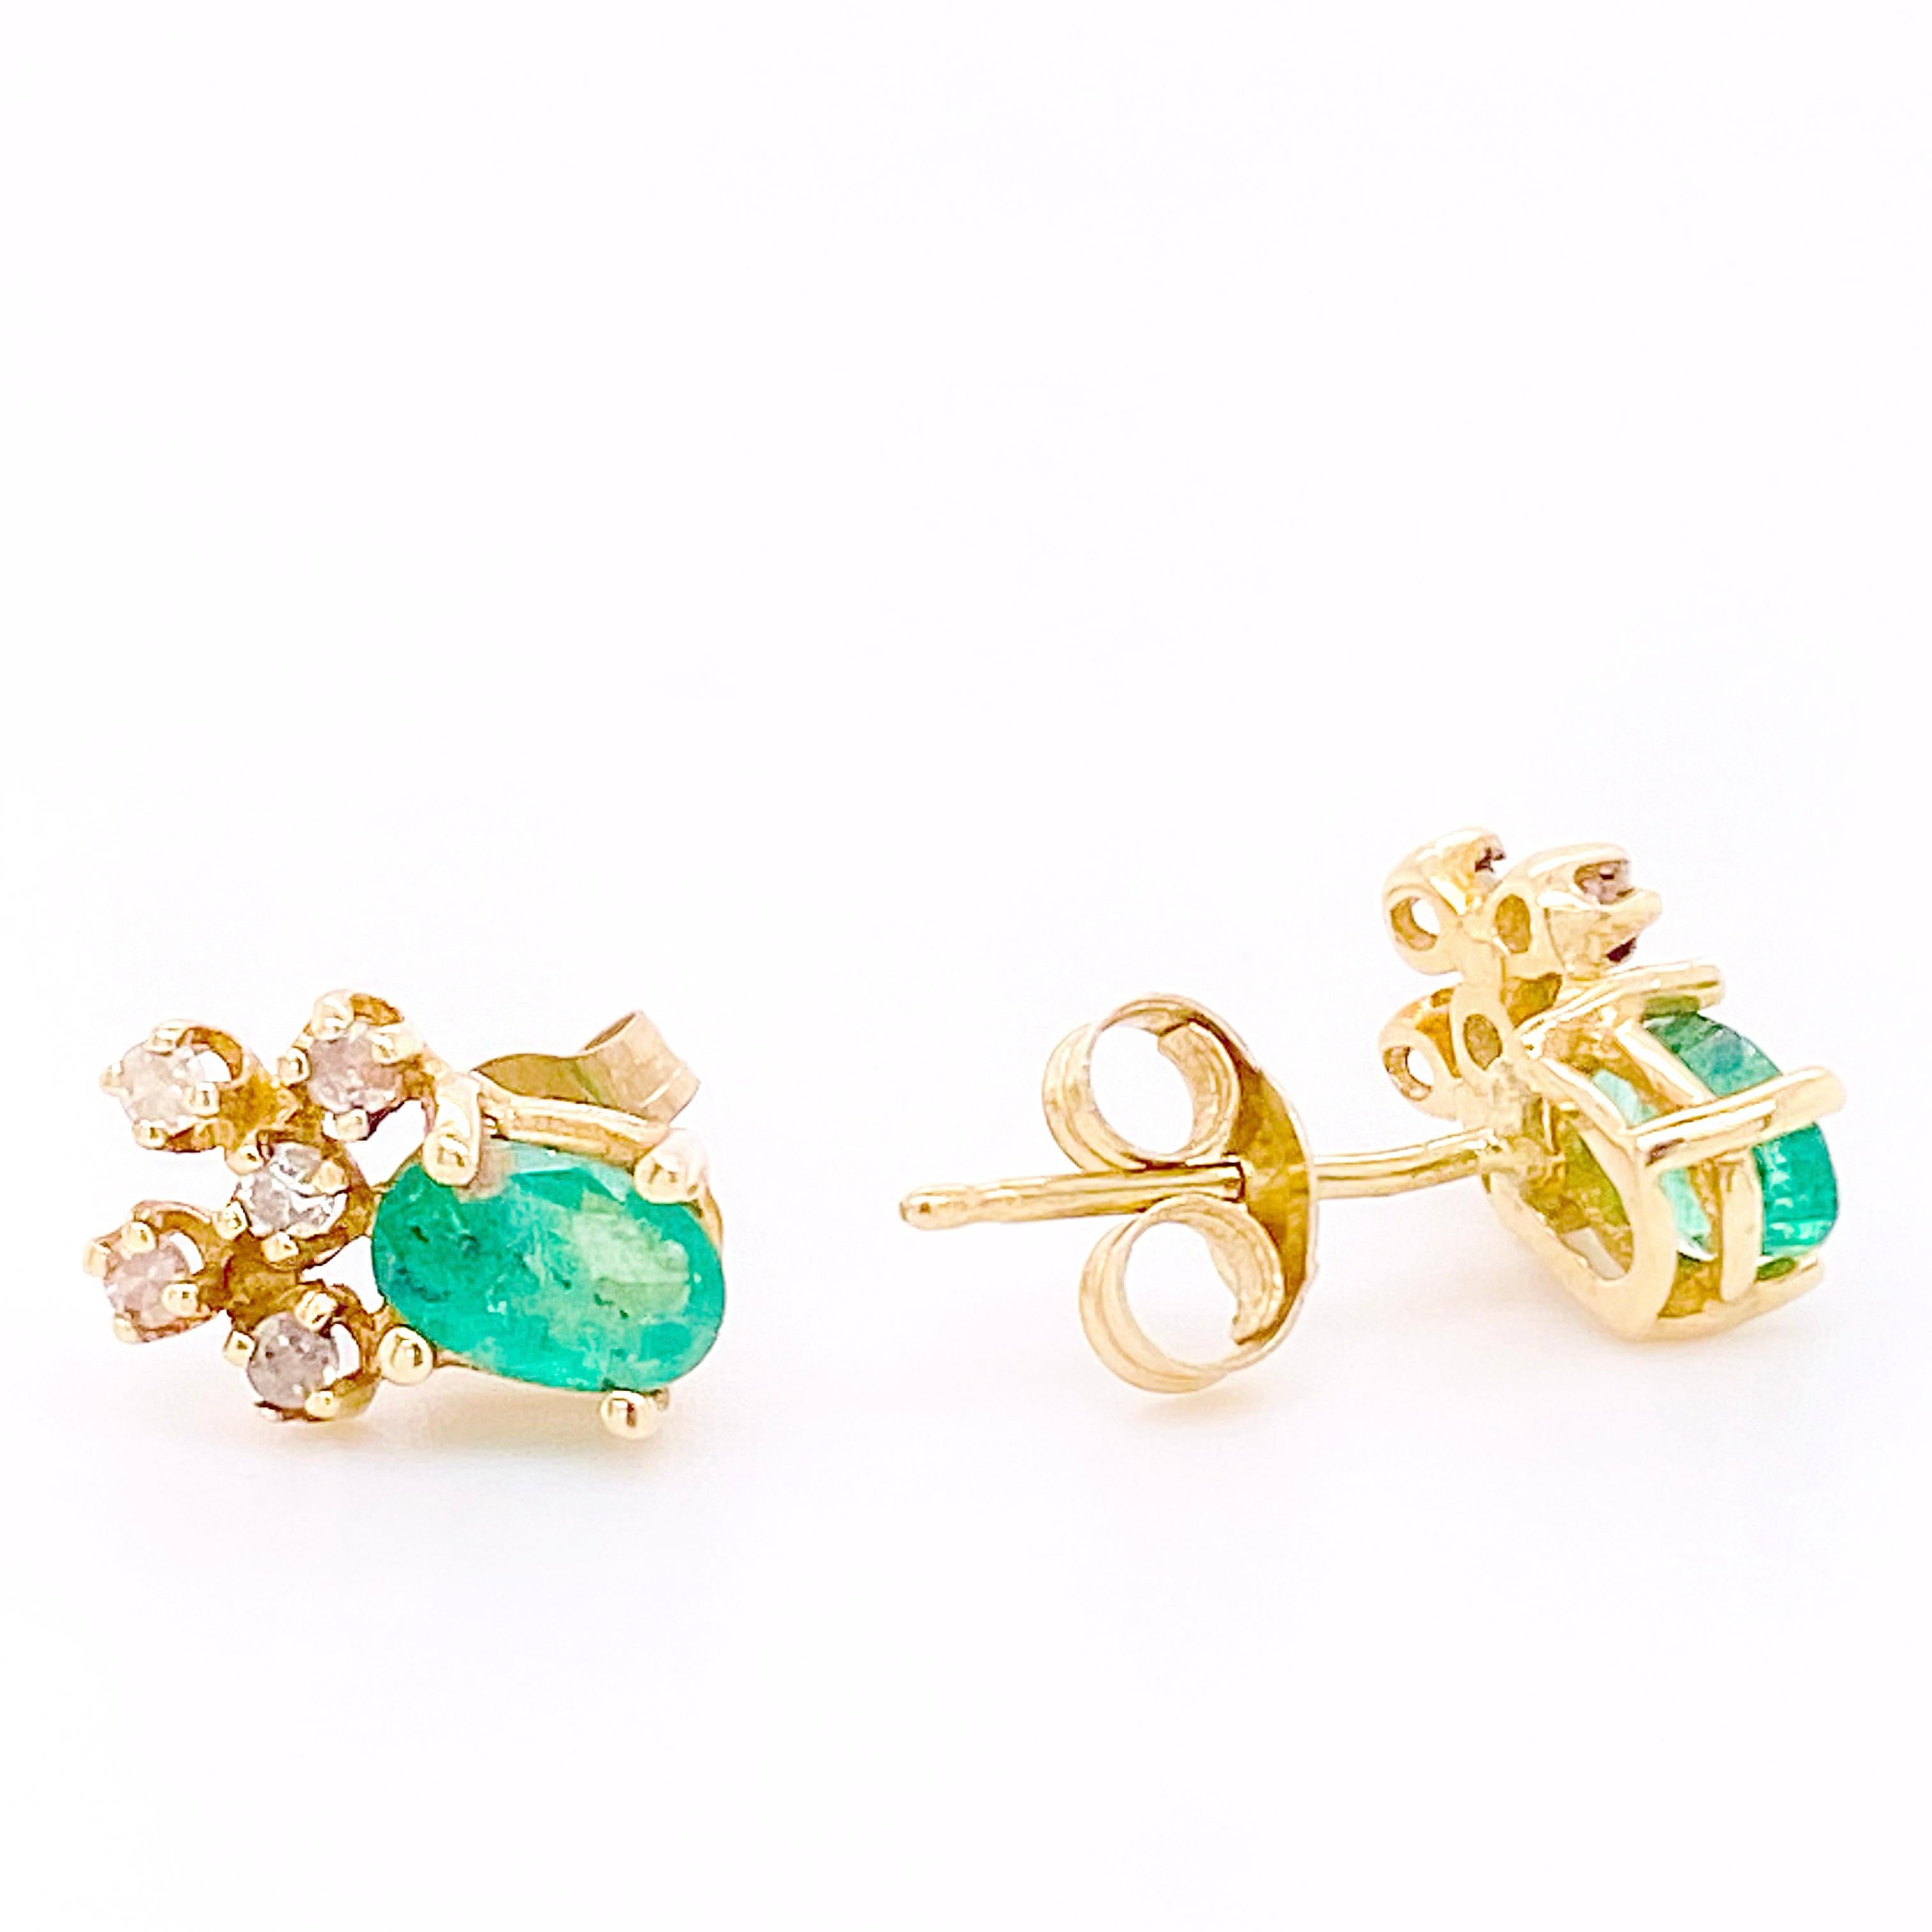 Vintage emerald earrings that are handmade are very rare! These custom-made estate earrings have a minimalist feels w five diamonds and one emerald in each earring. The emeralds are from a mine in Columbia and are a nice bright color!
Your earlobes